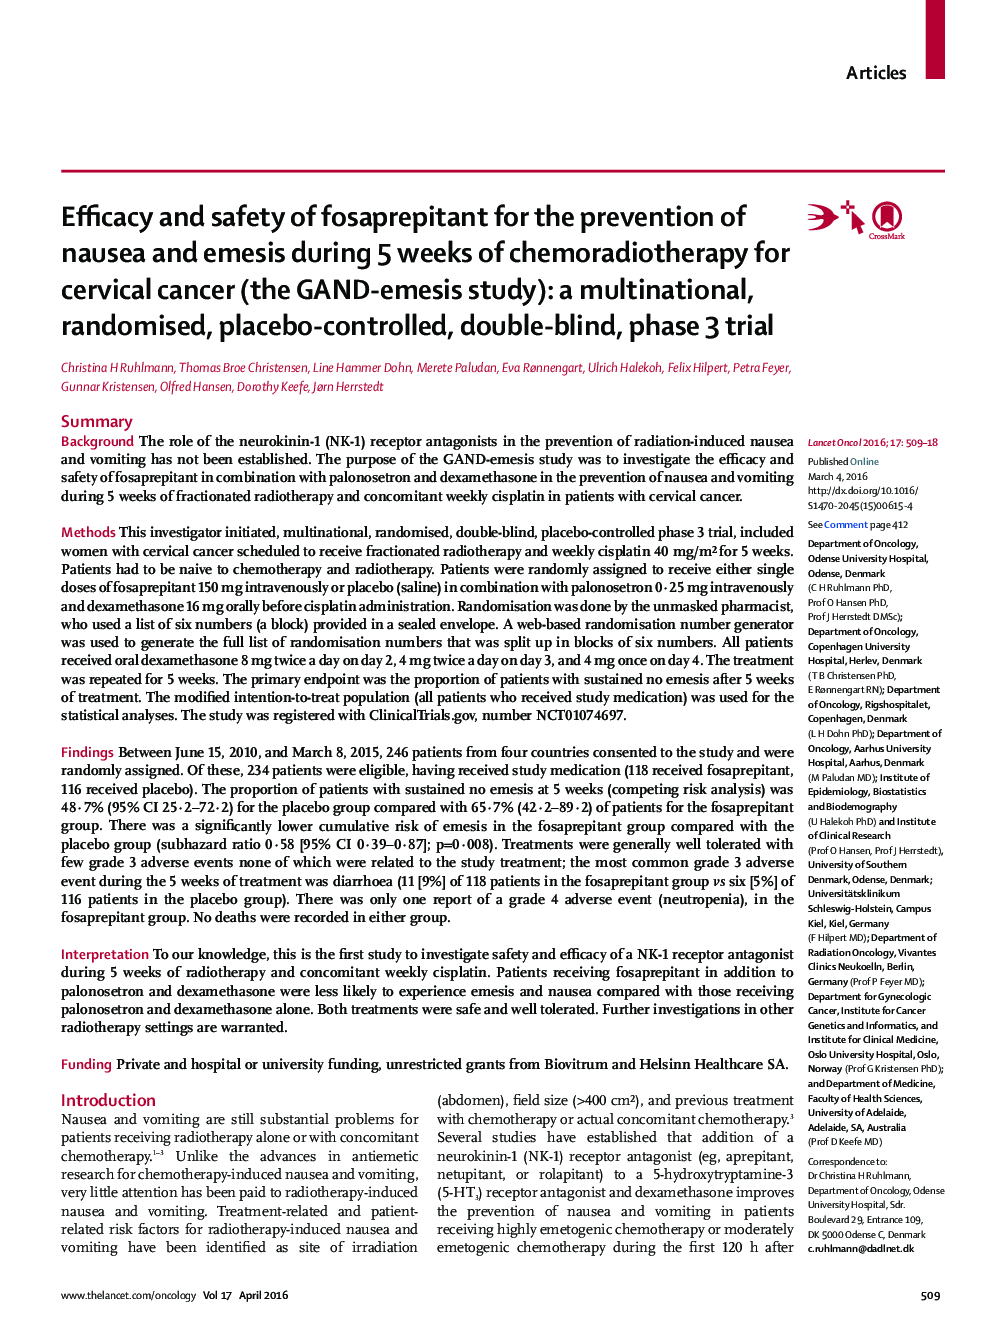 Efficacy and safety of fosaprepitant for the prevention of nausea and emesis during 5 weeks of chemoradiotherapy for cervical cancer (the GAND-emesis study): a multinational, randomised, placebo-controlled, double-blind, phase 3 trial